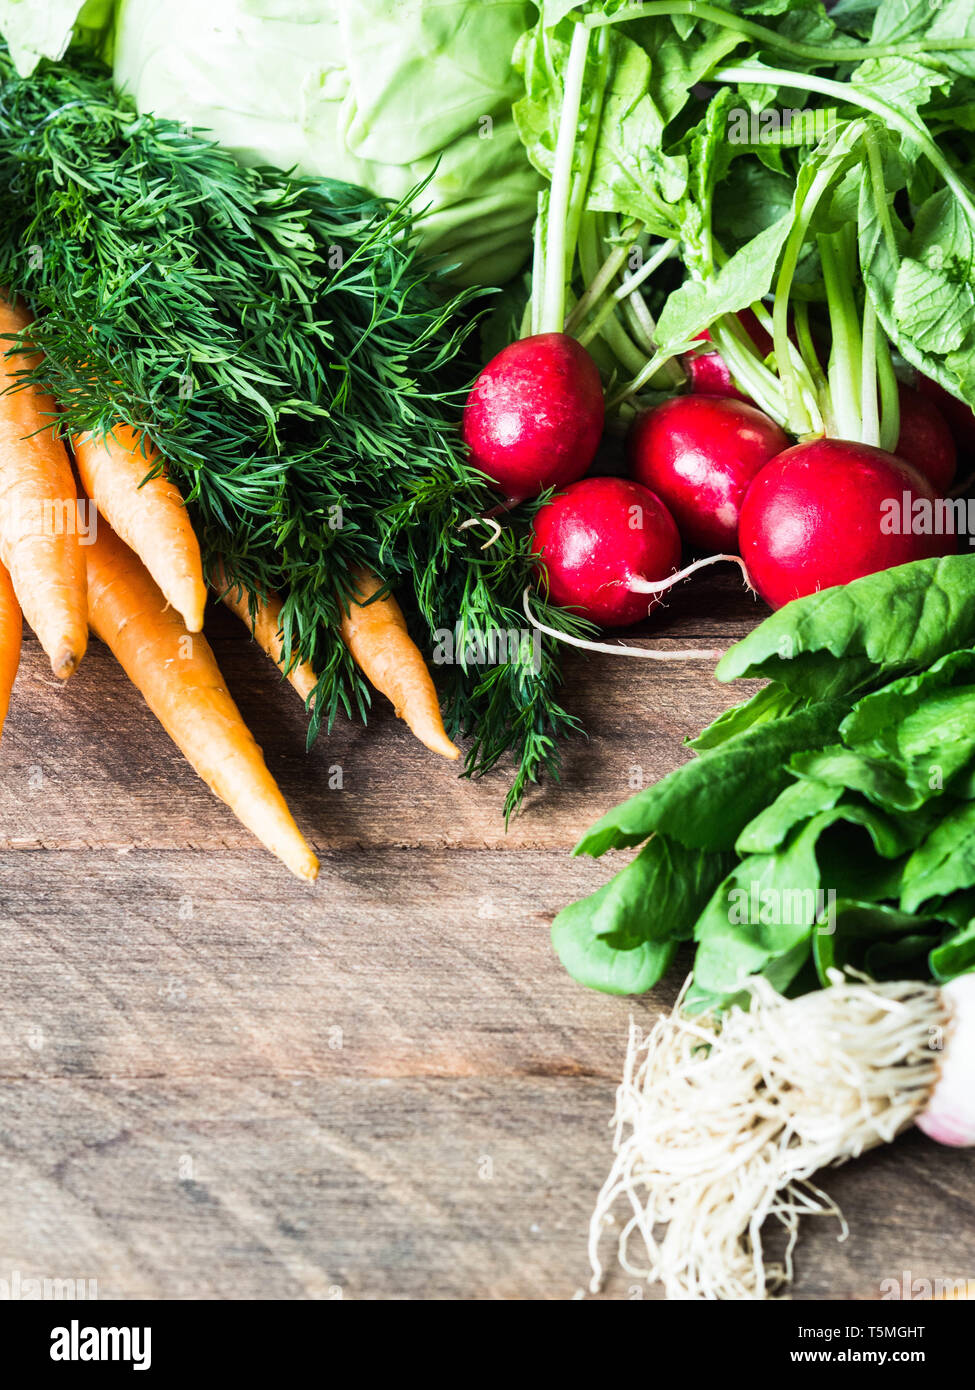 Fresh Spring vegetables and herbs - carrots, ramson, radish, dill, garlic, cabbage on a wood background. Spring harvest of fresh vegetables. Stock Photo